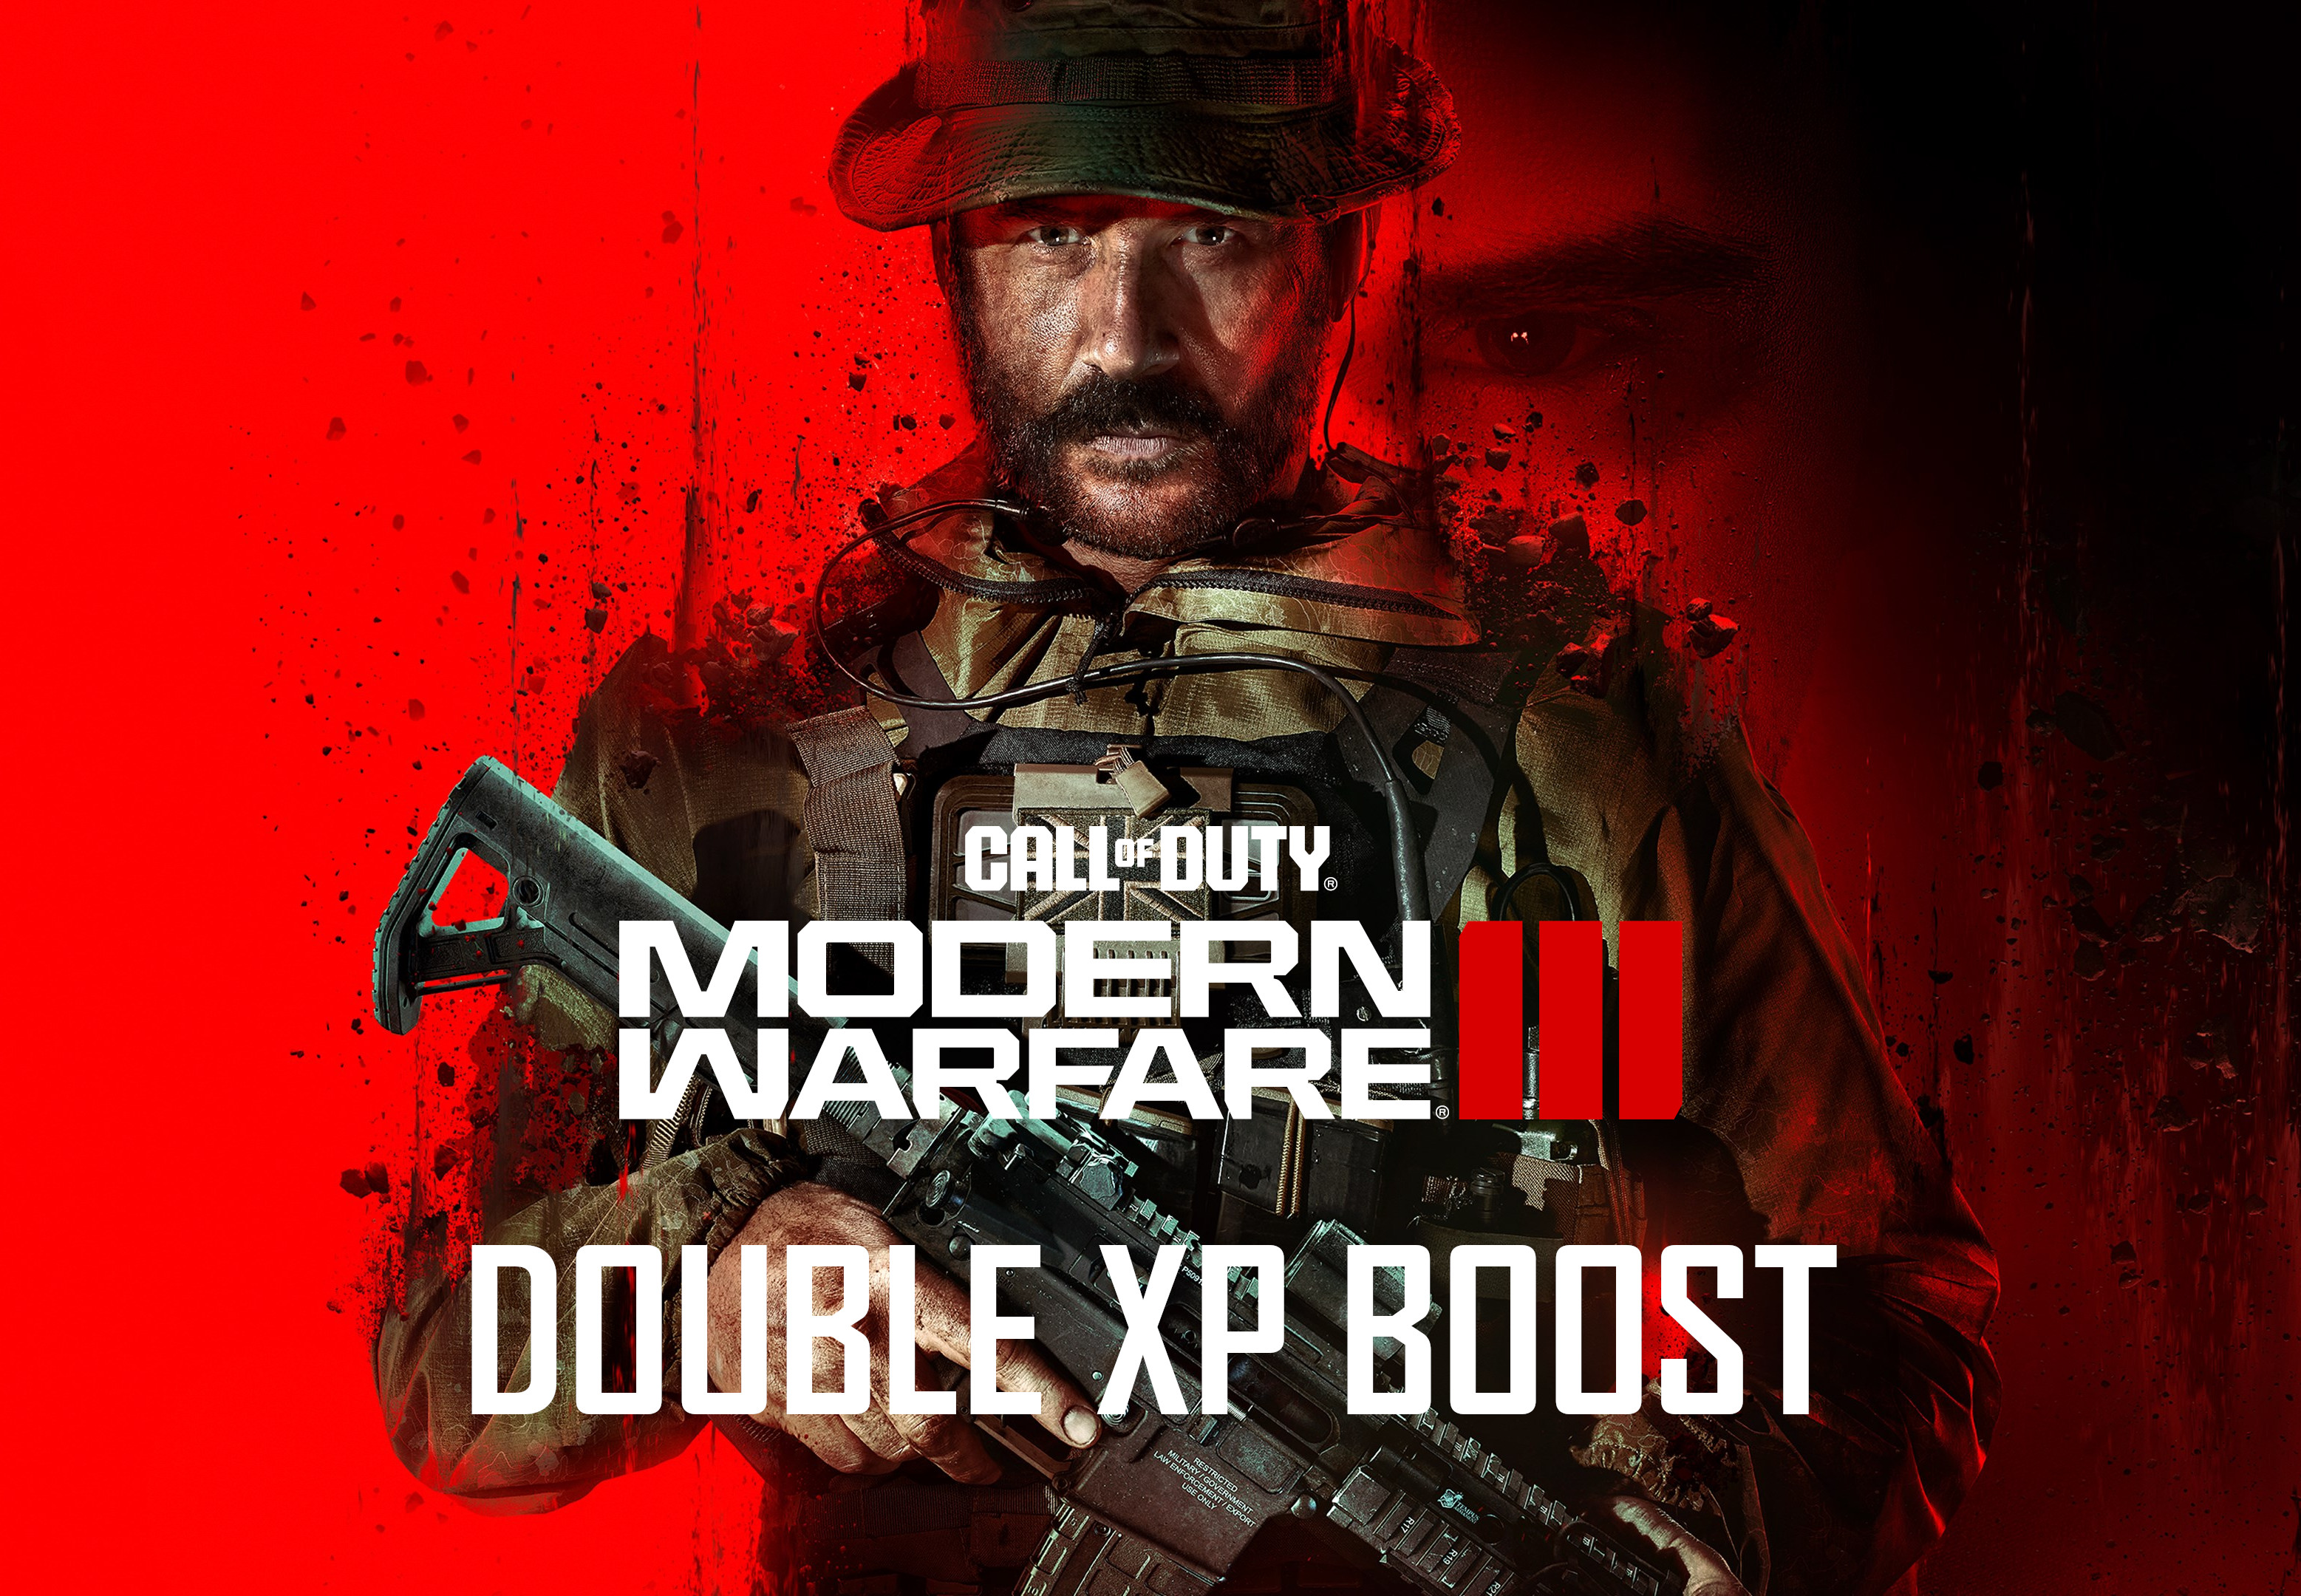 Call Of Duty: Modern Warfare III / Warzone 2 - 5 Hours Double XP Boost PC/PS4/PS5/XBOX One/Series X,S CD Key